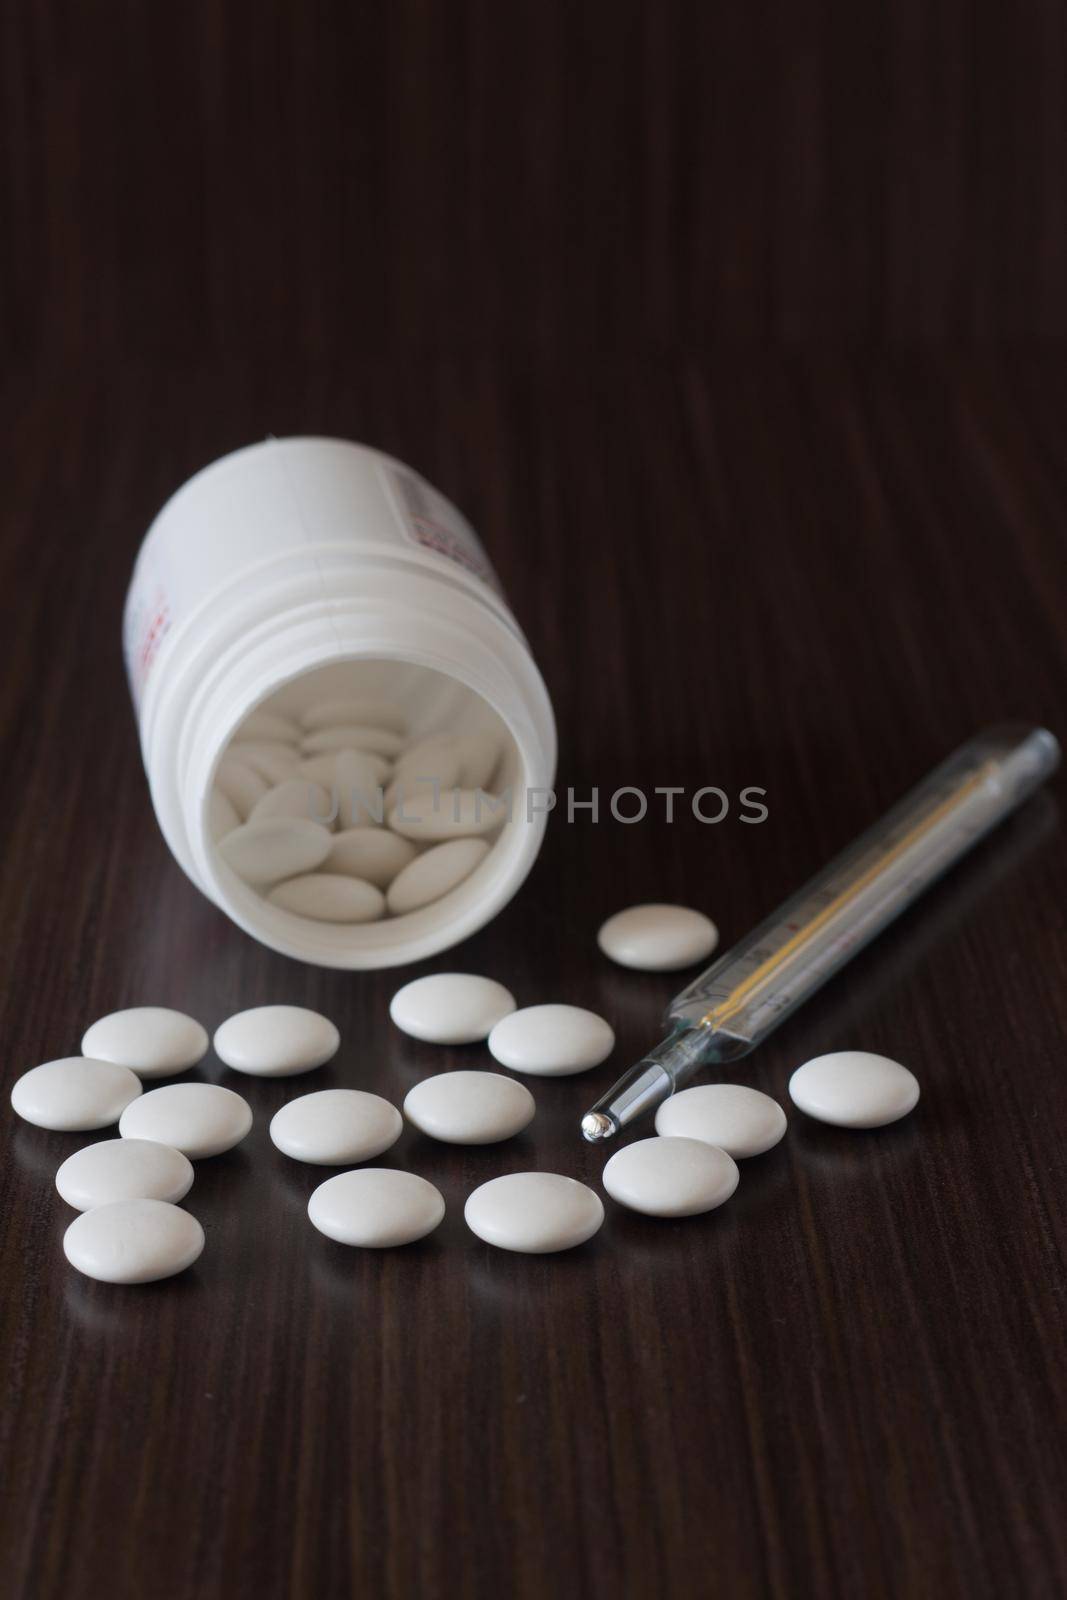 Pills from a jar and body temperature thermometer on a dark background